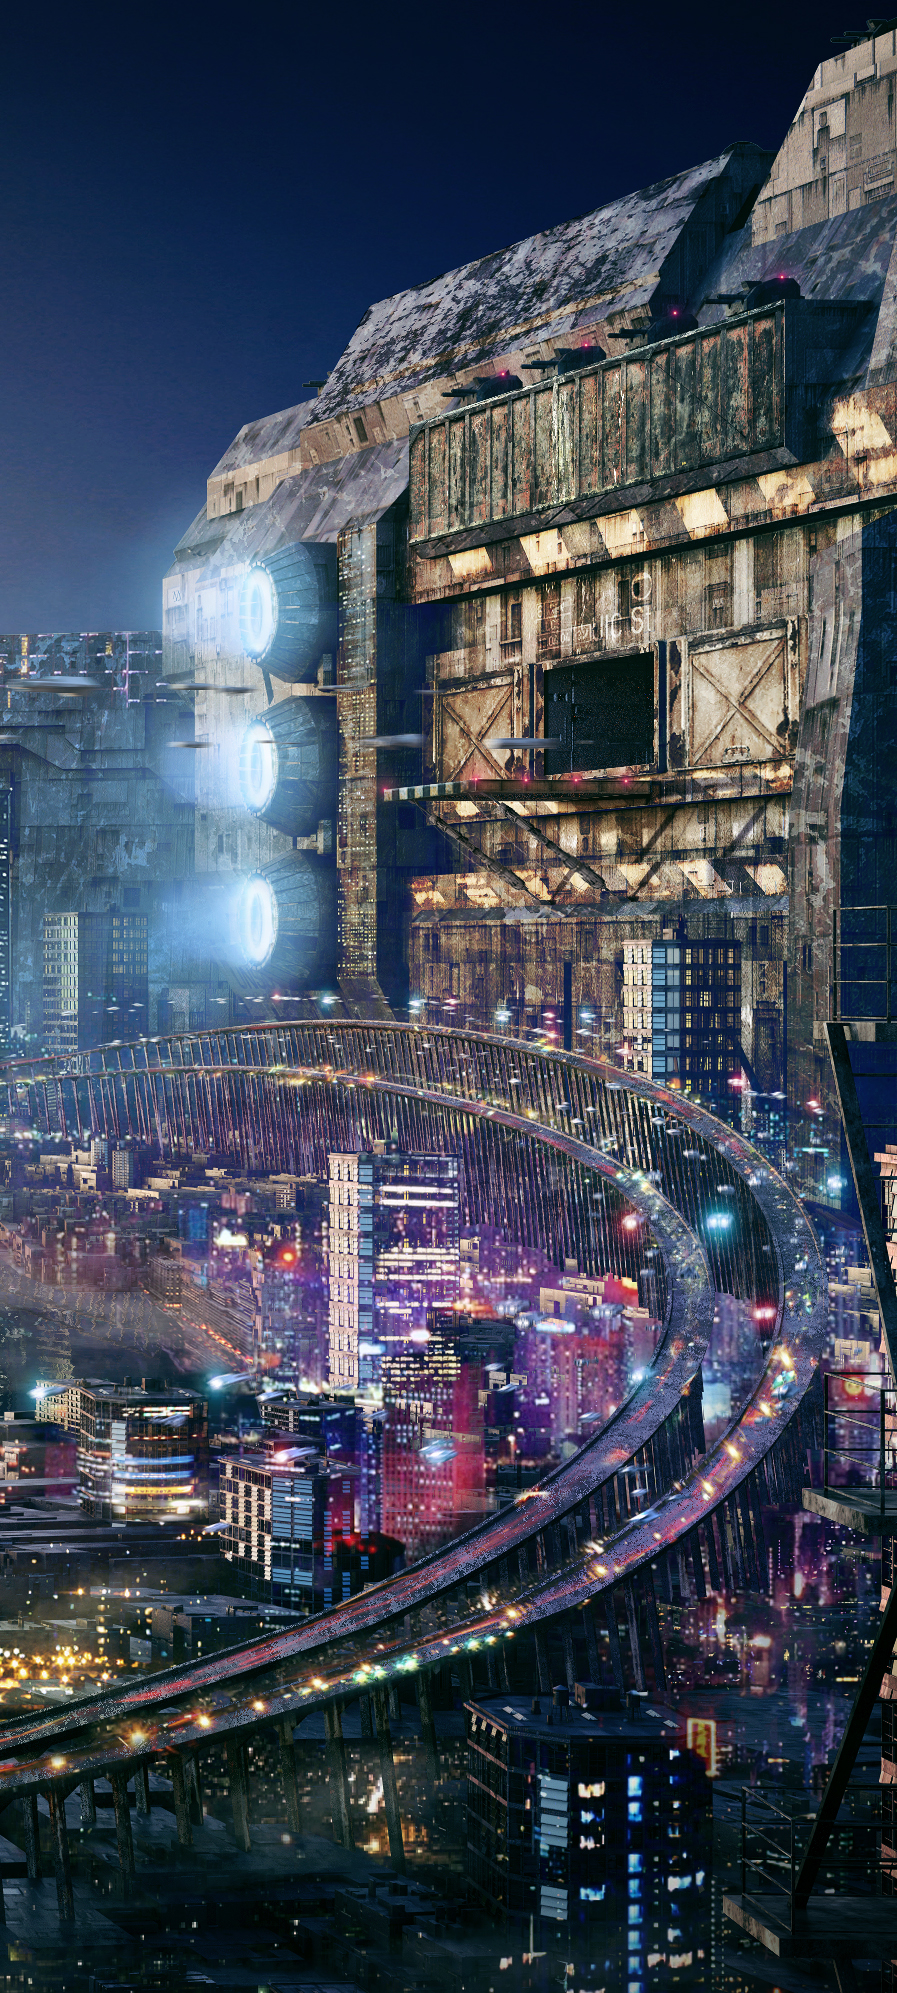 futuristic city futur Space  ships industrial night environment 3dsmax vray photoshop